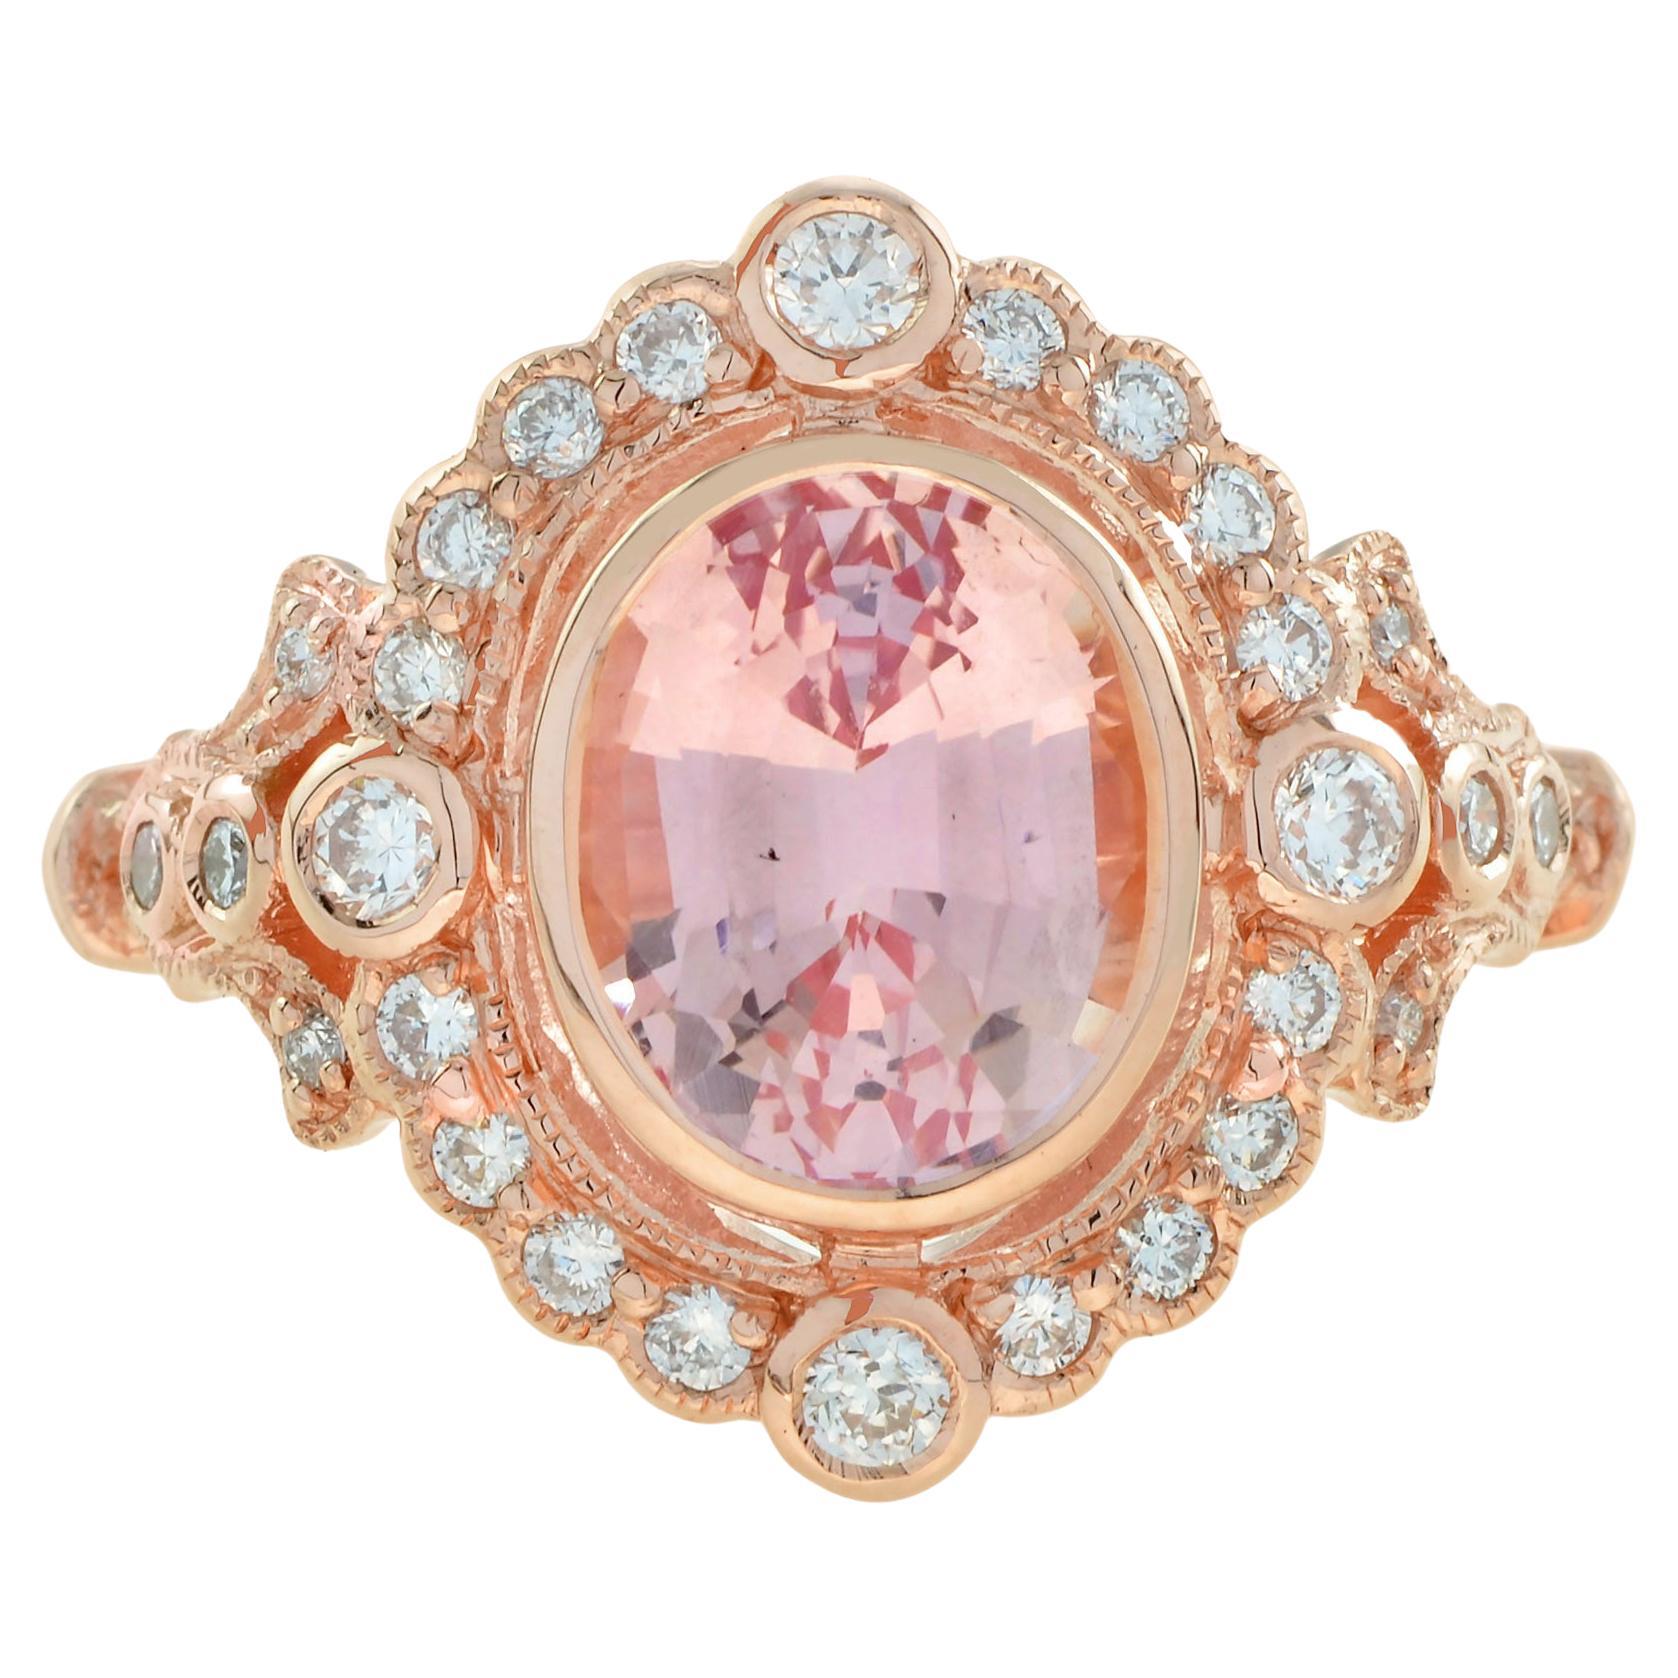 For Sale:  2.50 Ct. Morganite Diamond Vintage Style Halo Engagement Ring in 18K Rose Gold